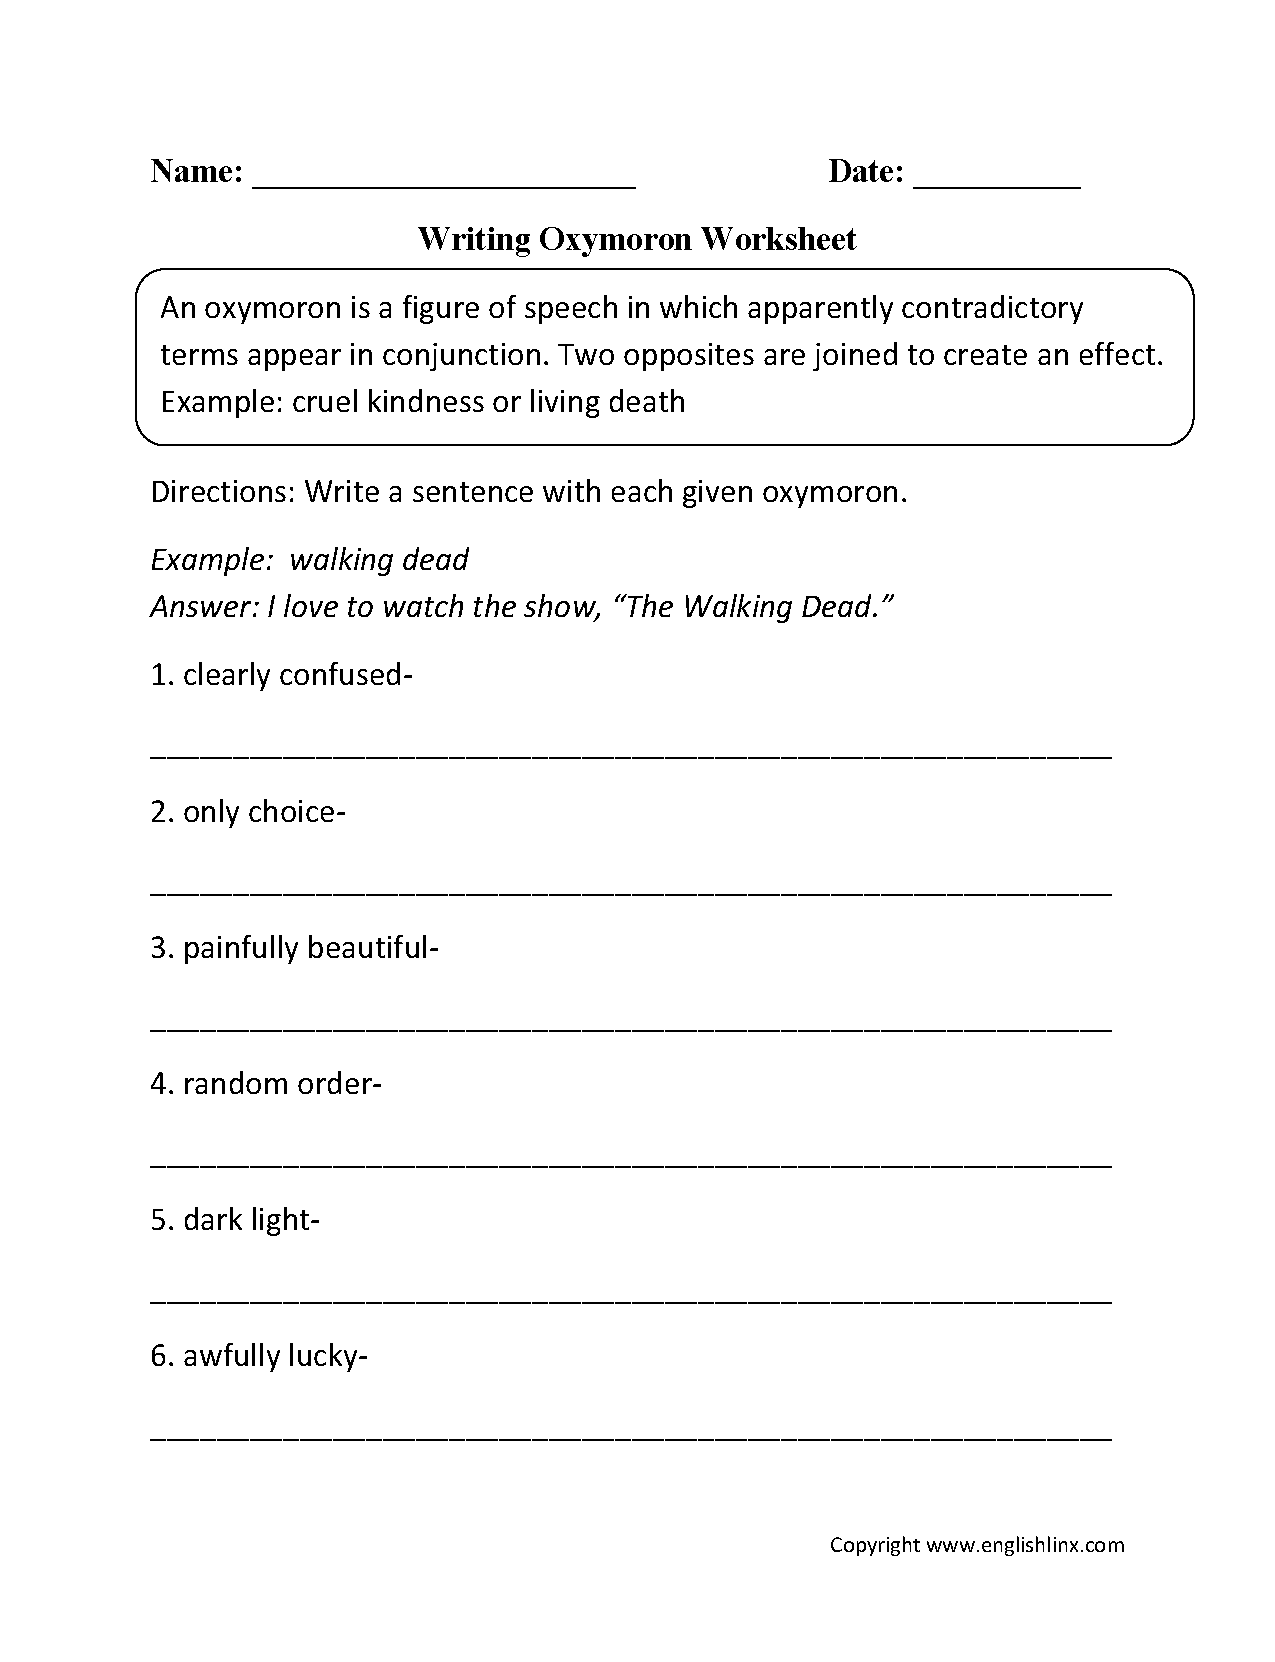 15-best-images-of-figurative-language-worksheets-2nd-grade-idioms-and-figurative-language